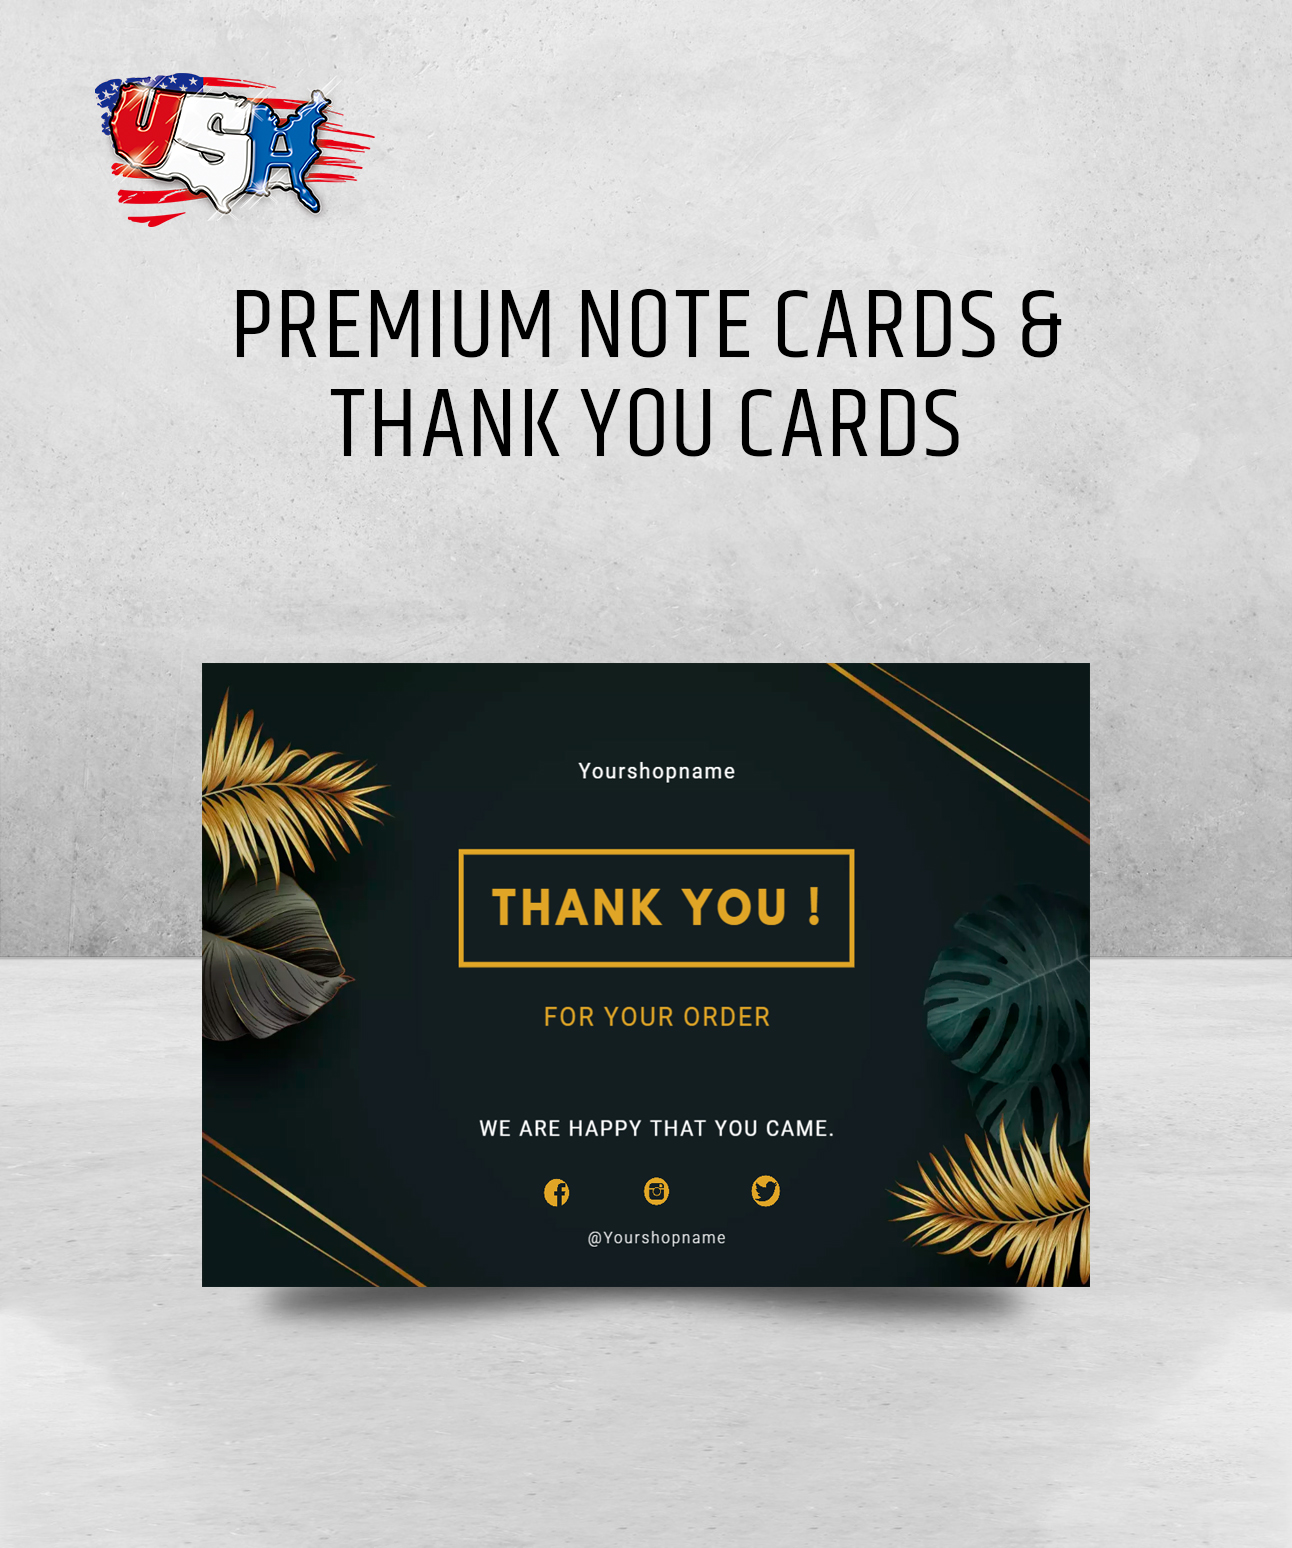 Premium Note Cards & Thank You Cards